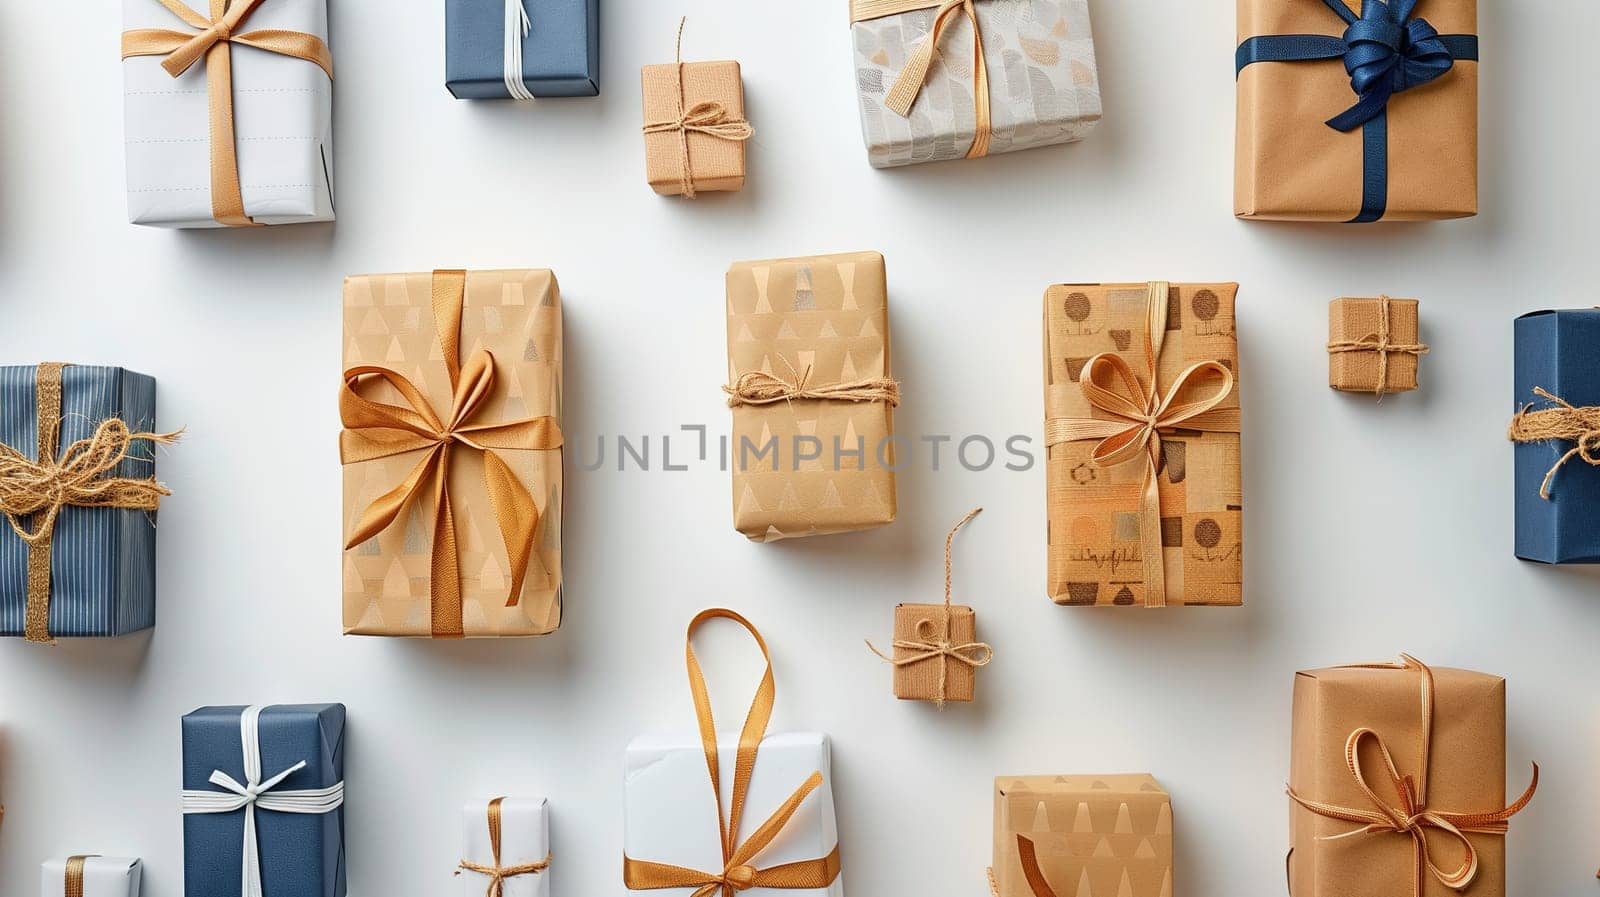 A group of various wrapped presents are displayed next to each other, showcasing a sale or Black Friday concept. The gifts vary in size and color, arranged neatly in a row.